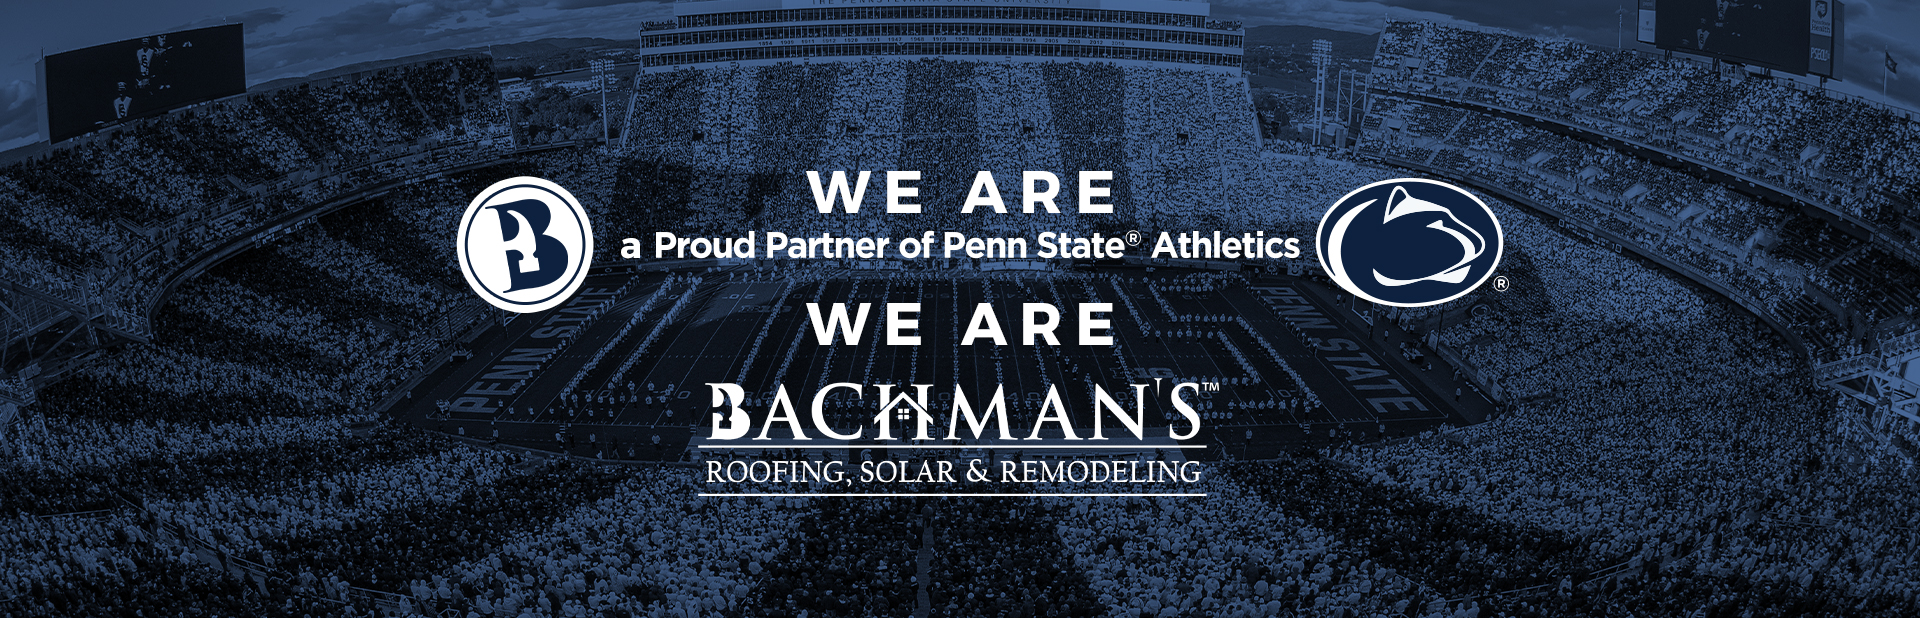 We Are Bachman's Roofing